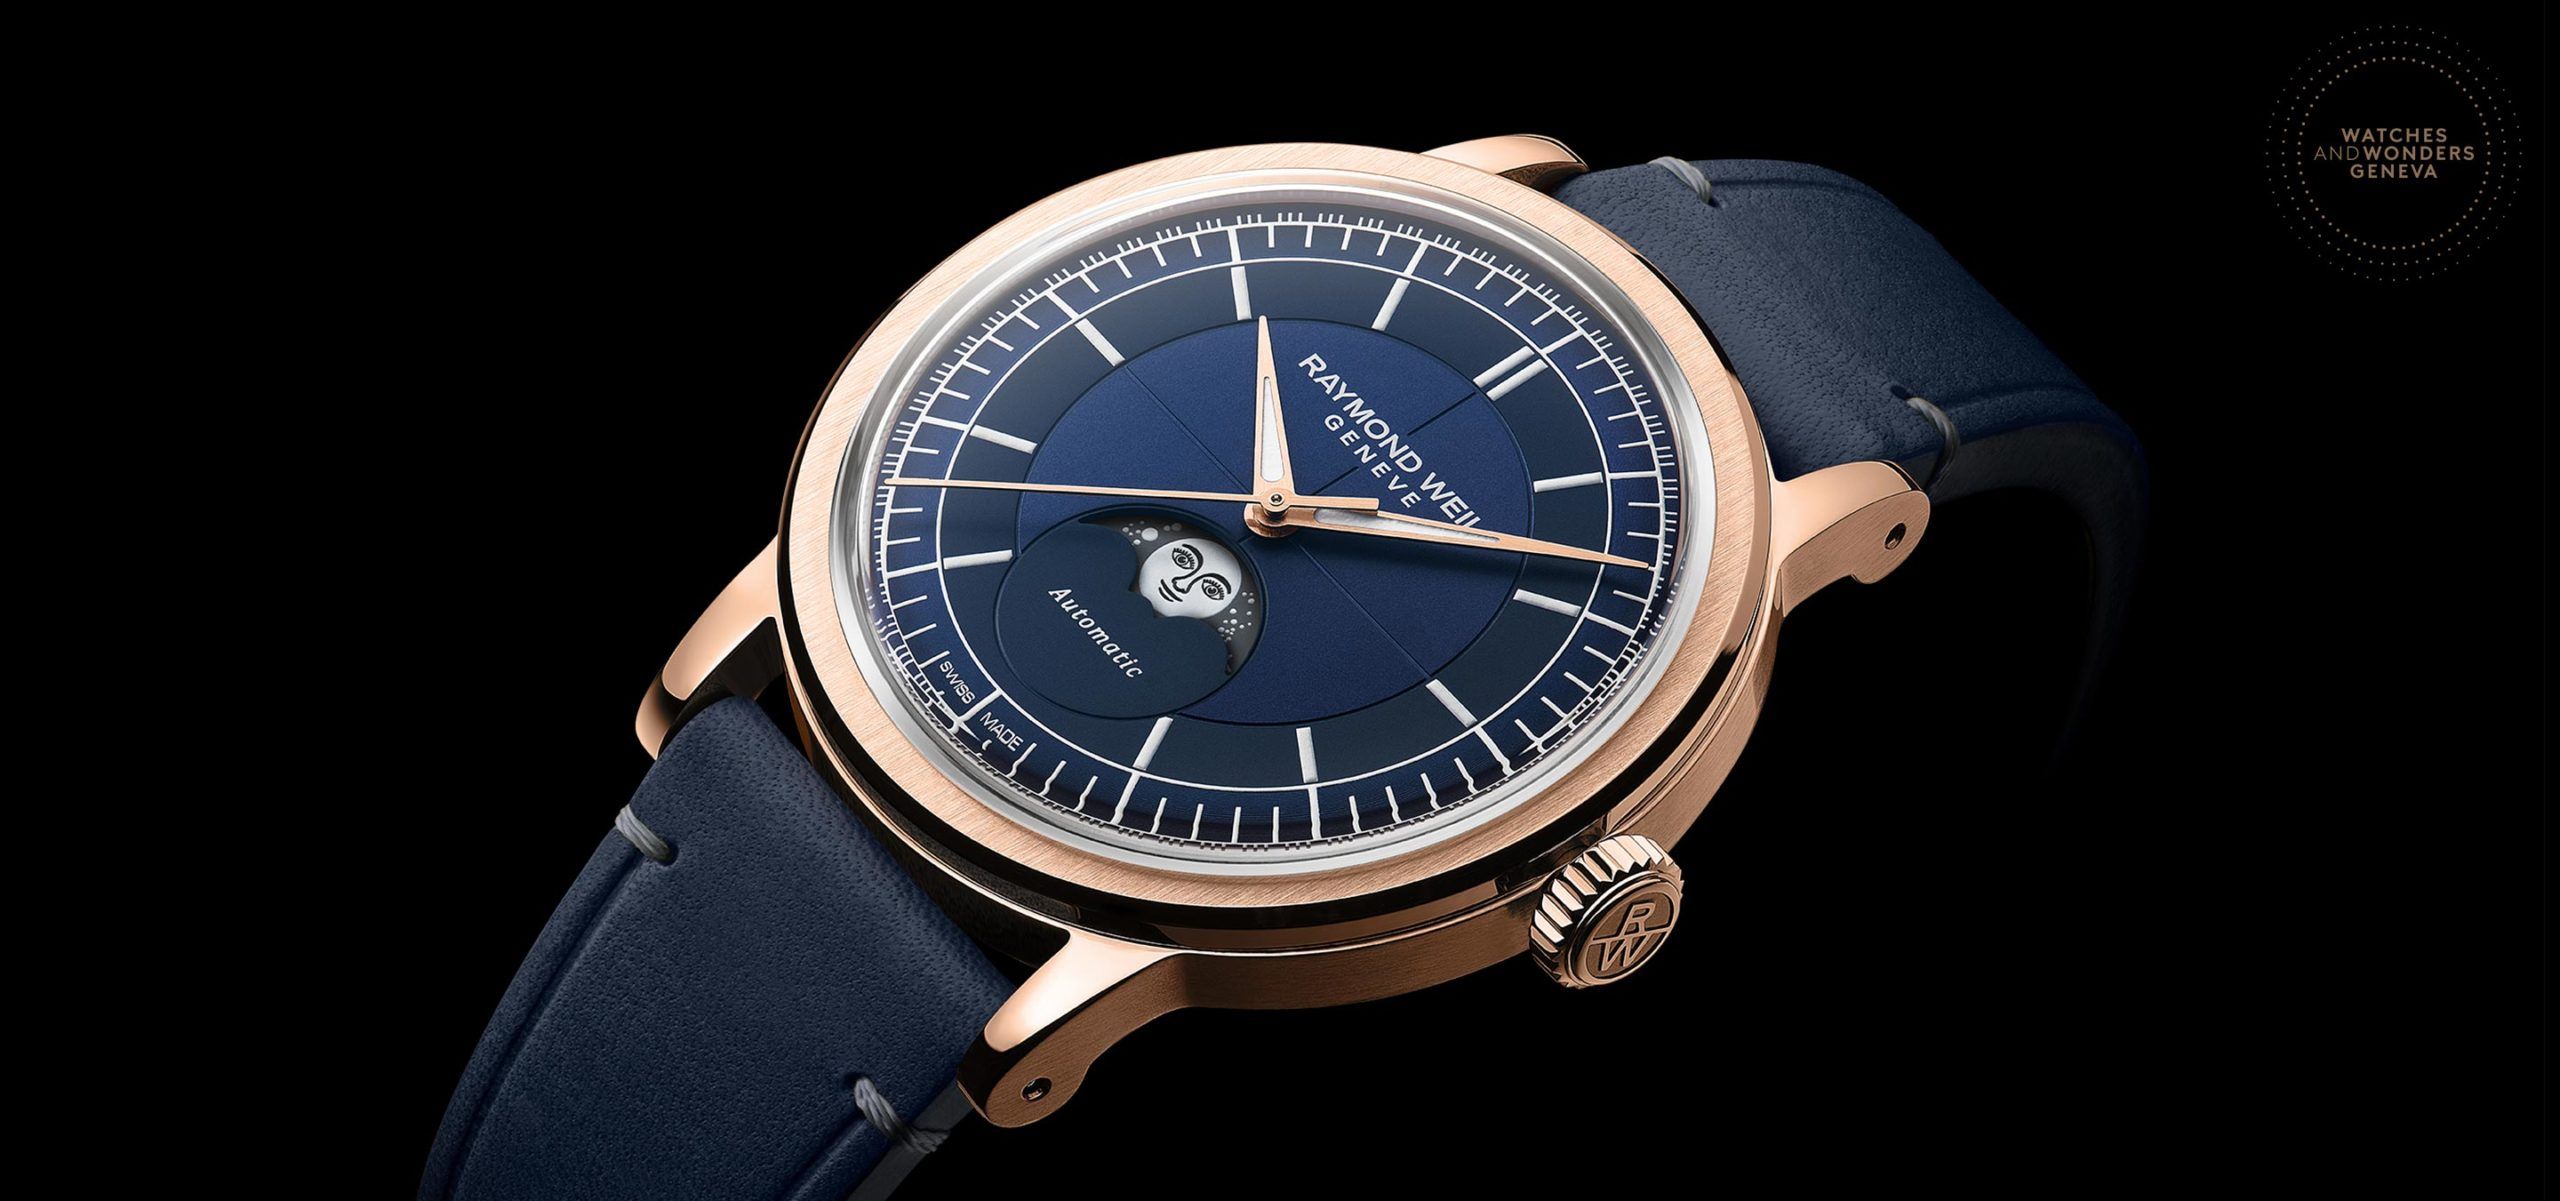 Vintage Charm: Introducing The New Raymond Weil Millesime Watches